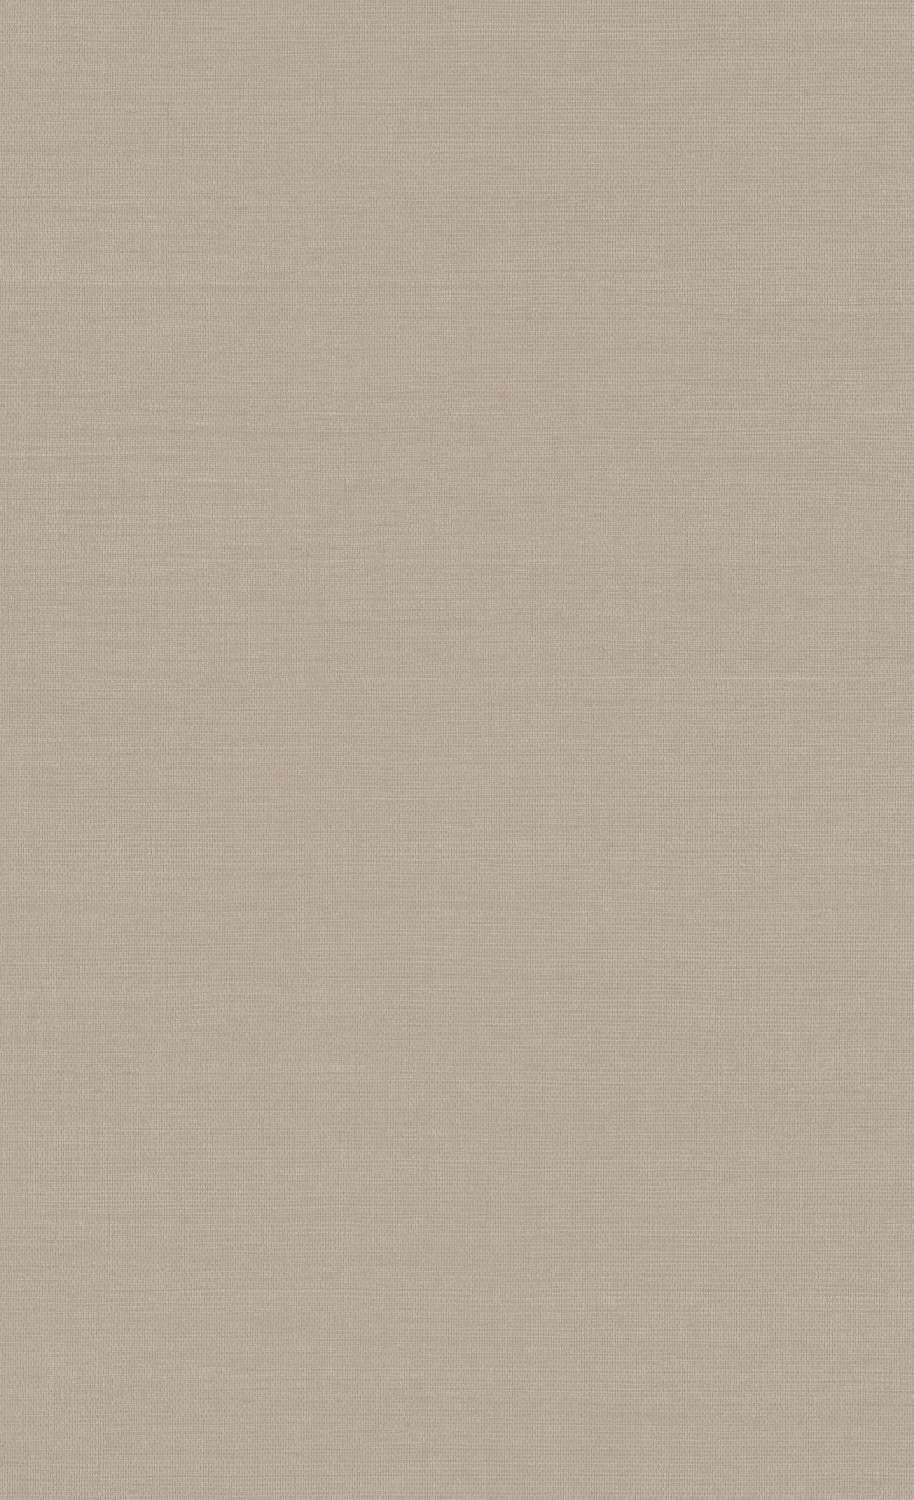 Pin by  on Ideeën  Pastel color background Brown plain background  pastel Plain brown wallpaper aesthetic